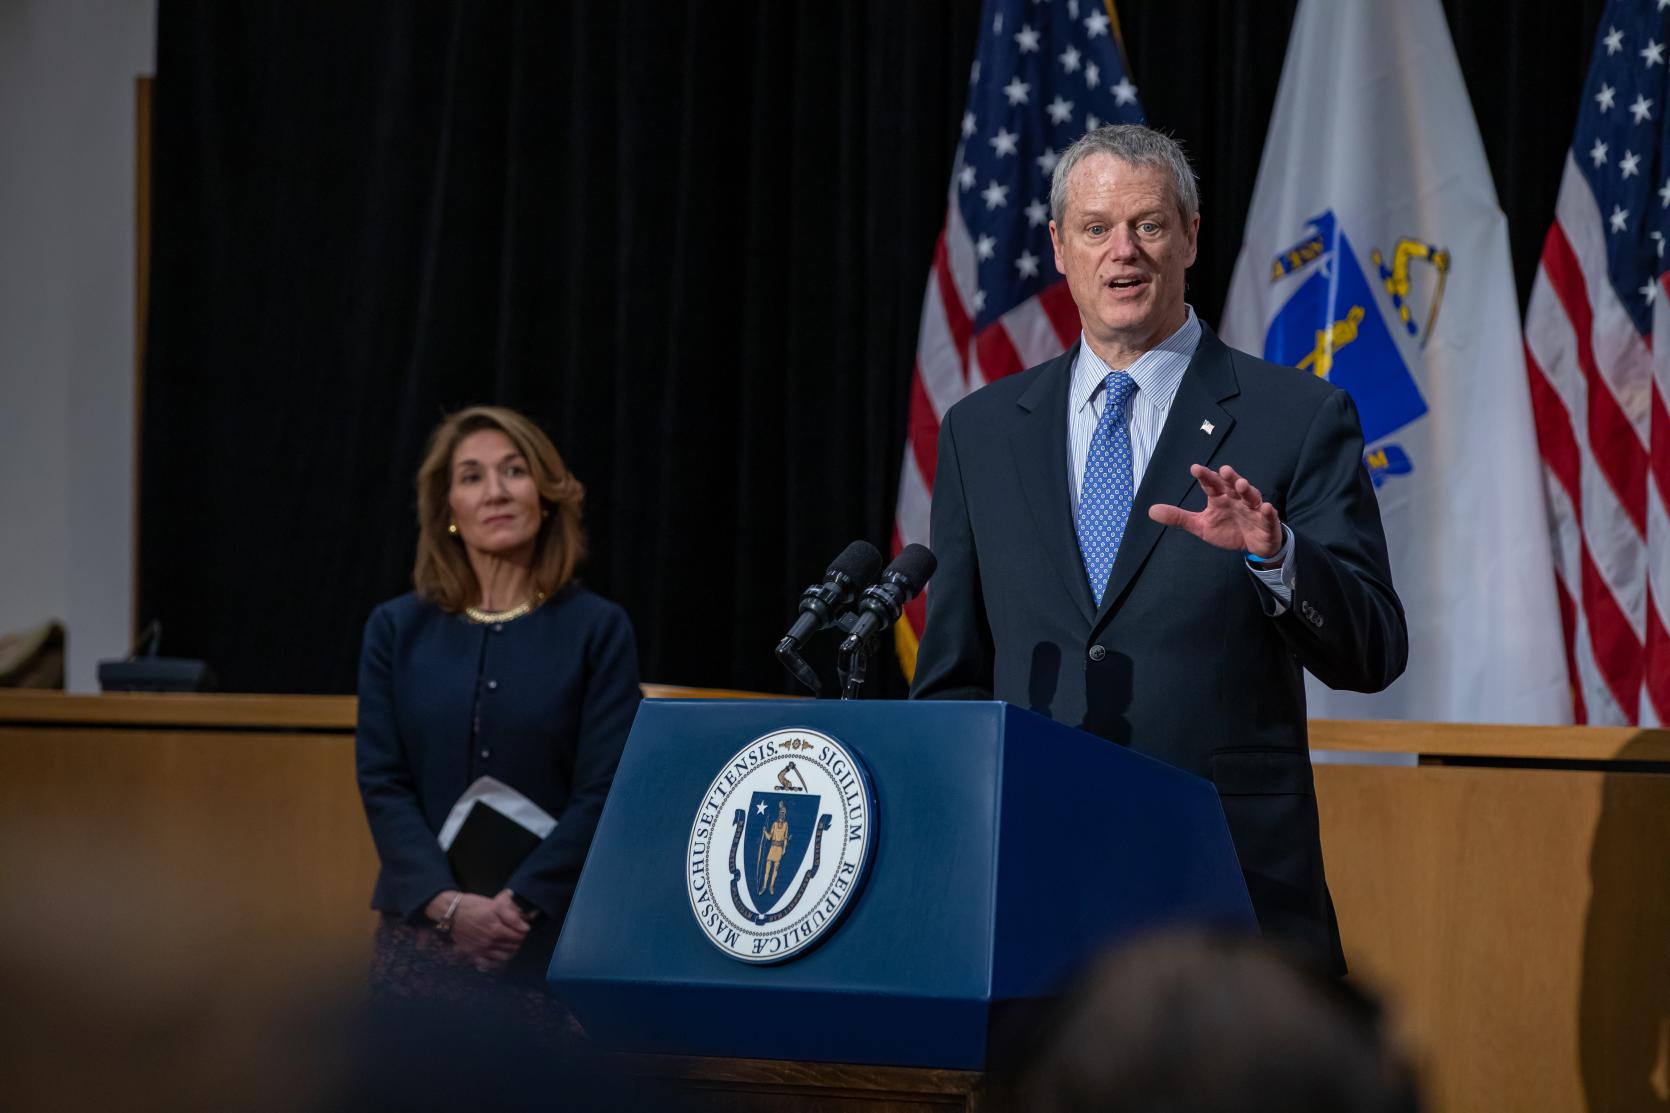 Baker-Polito Administration Provides Update on COVID-19 Testing Capacity and Strategy, PPE Procurement